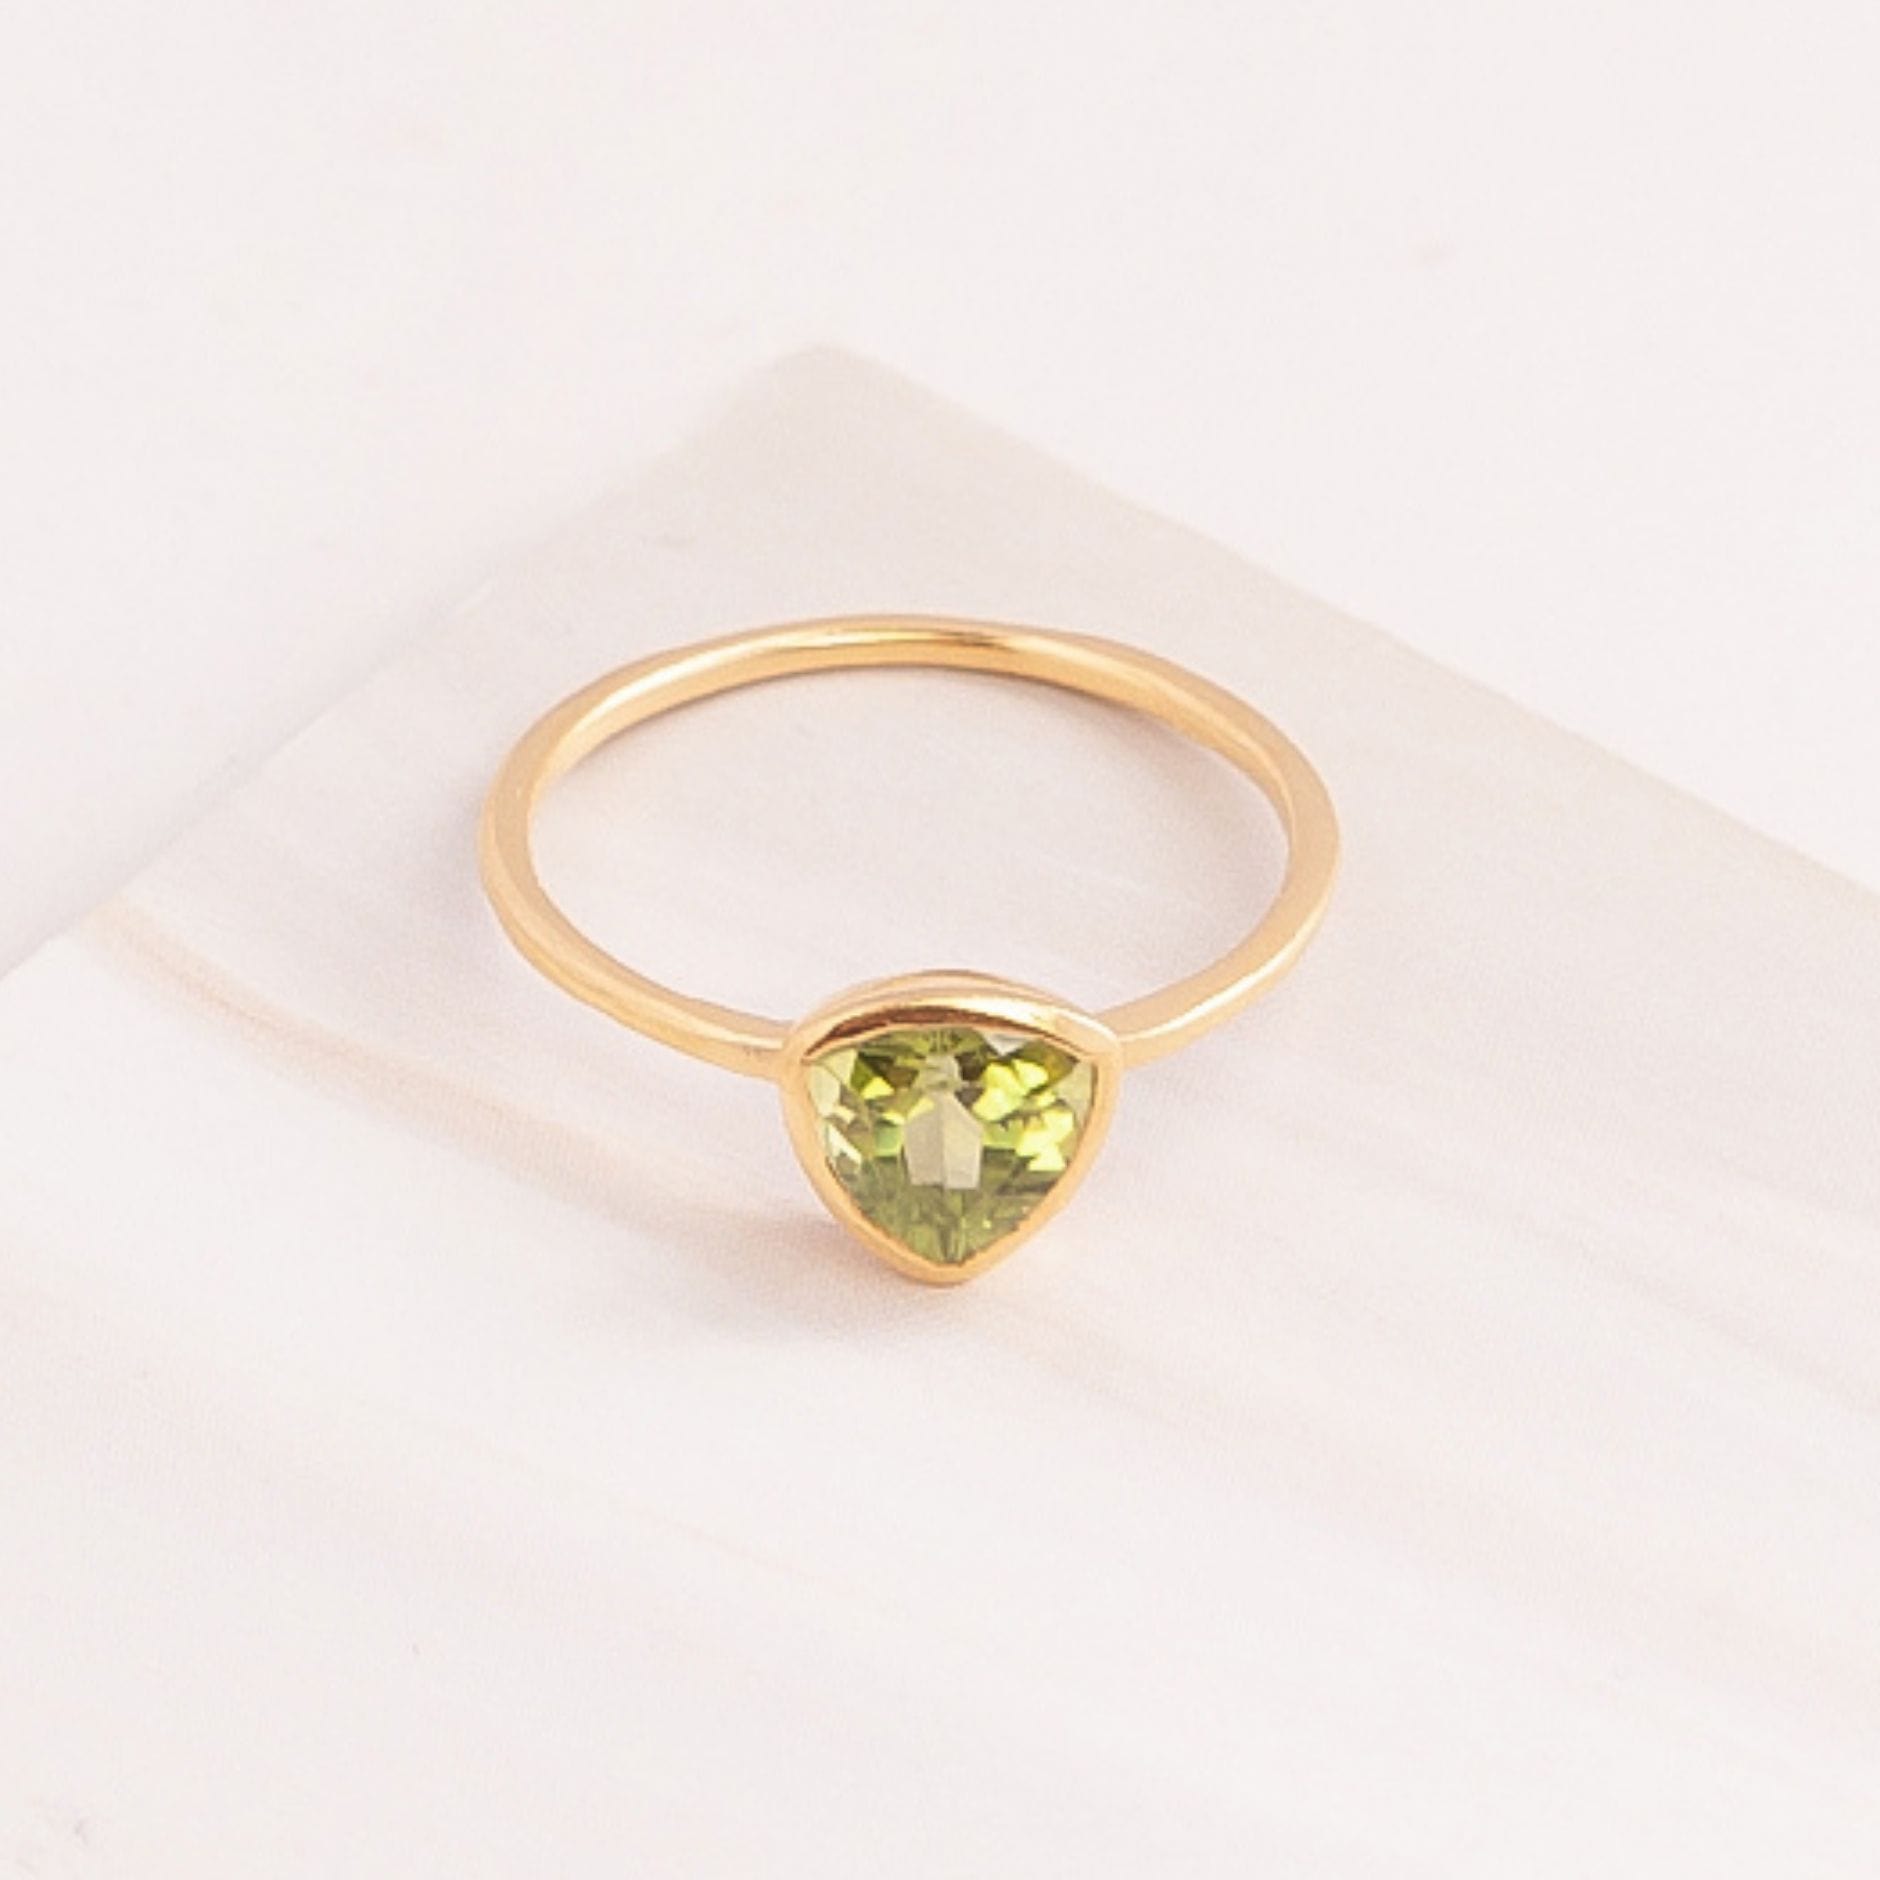 Emblem Jewelry Rings Green Peridot / Triangle Signature Candy Gemstone Stack Rings (Ring Size 5)